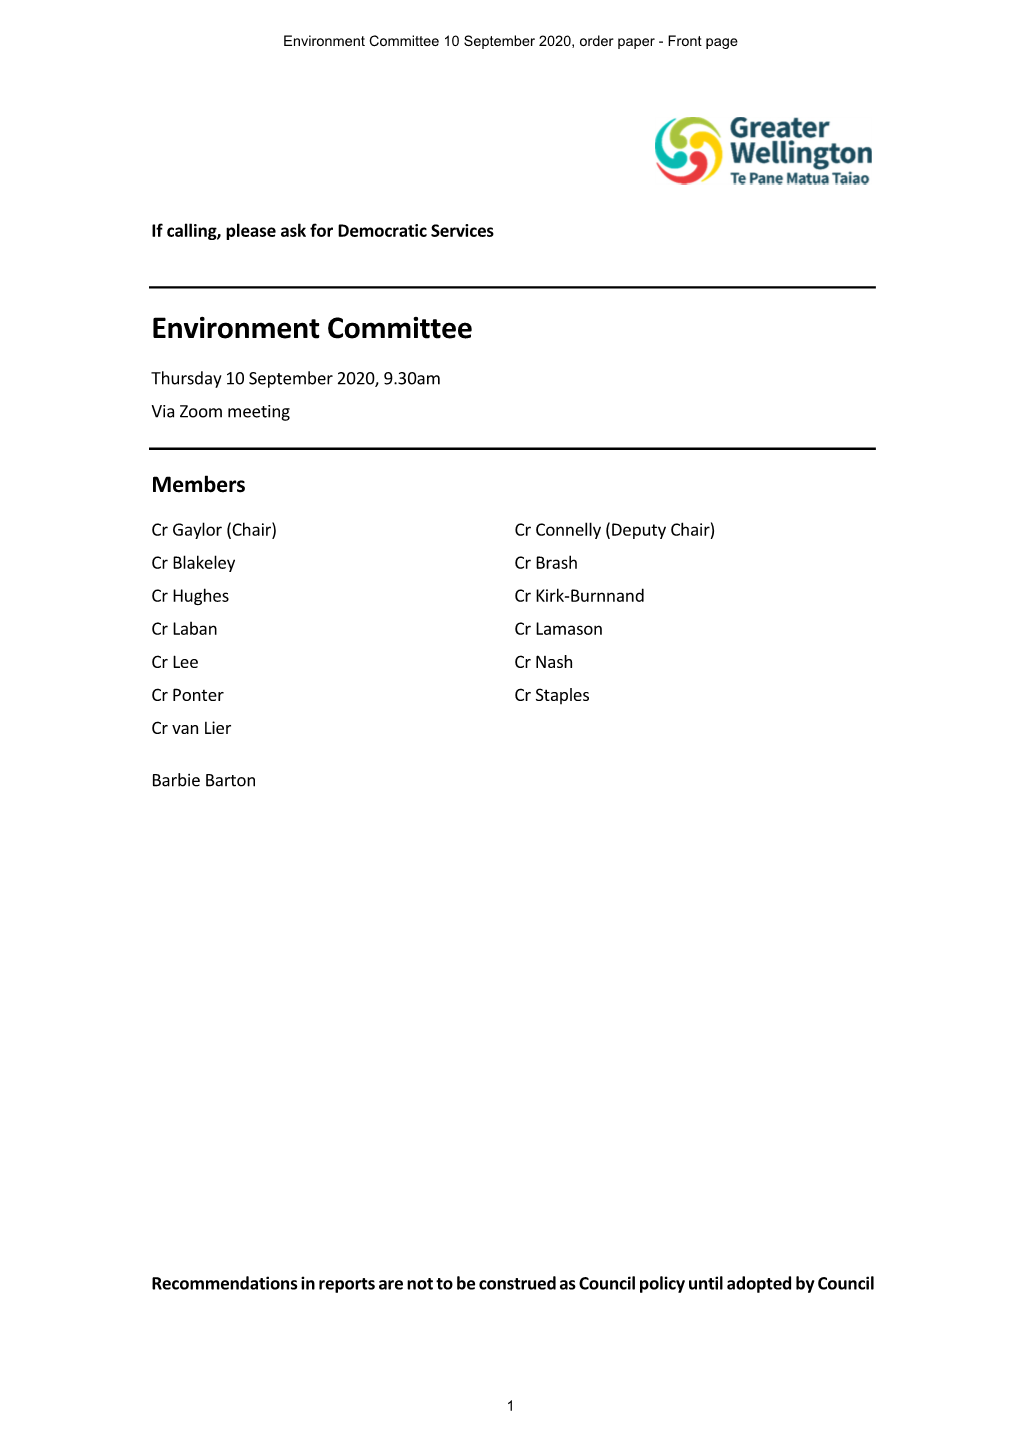 Environment Committee 10 September 2020, Order Paper - Front Page